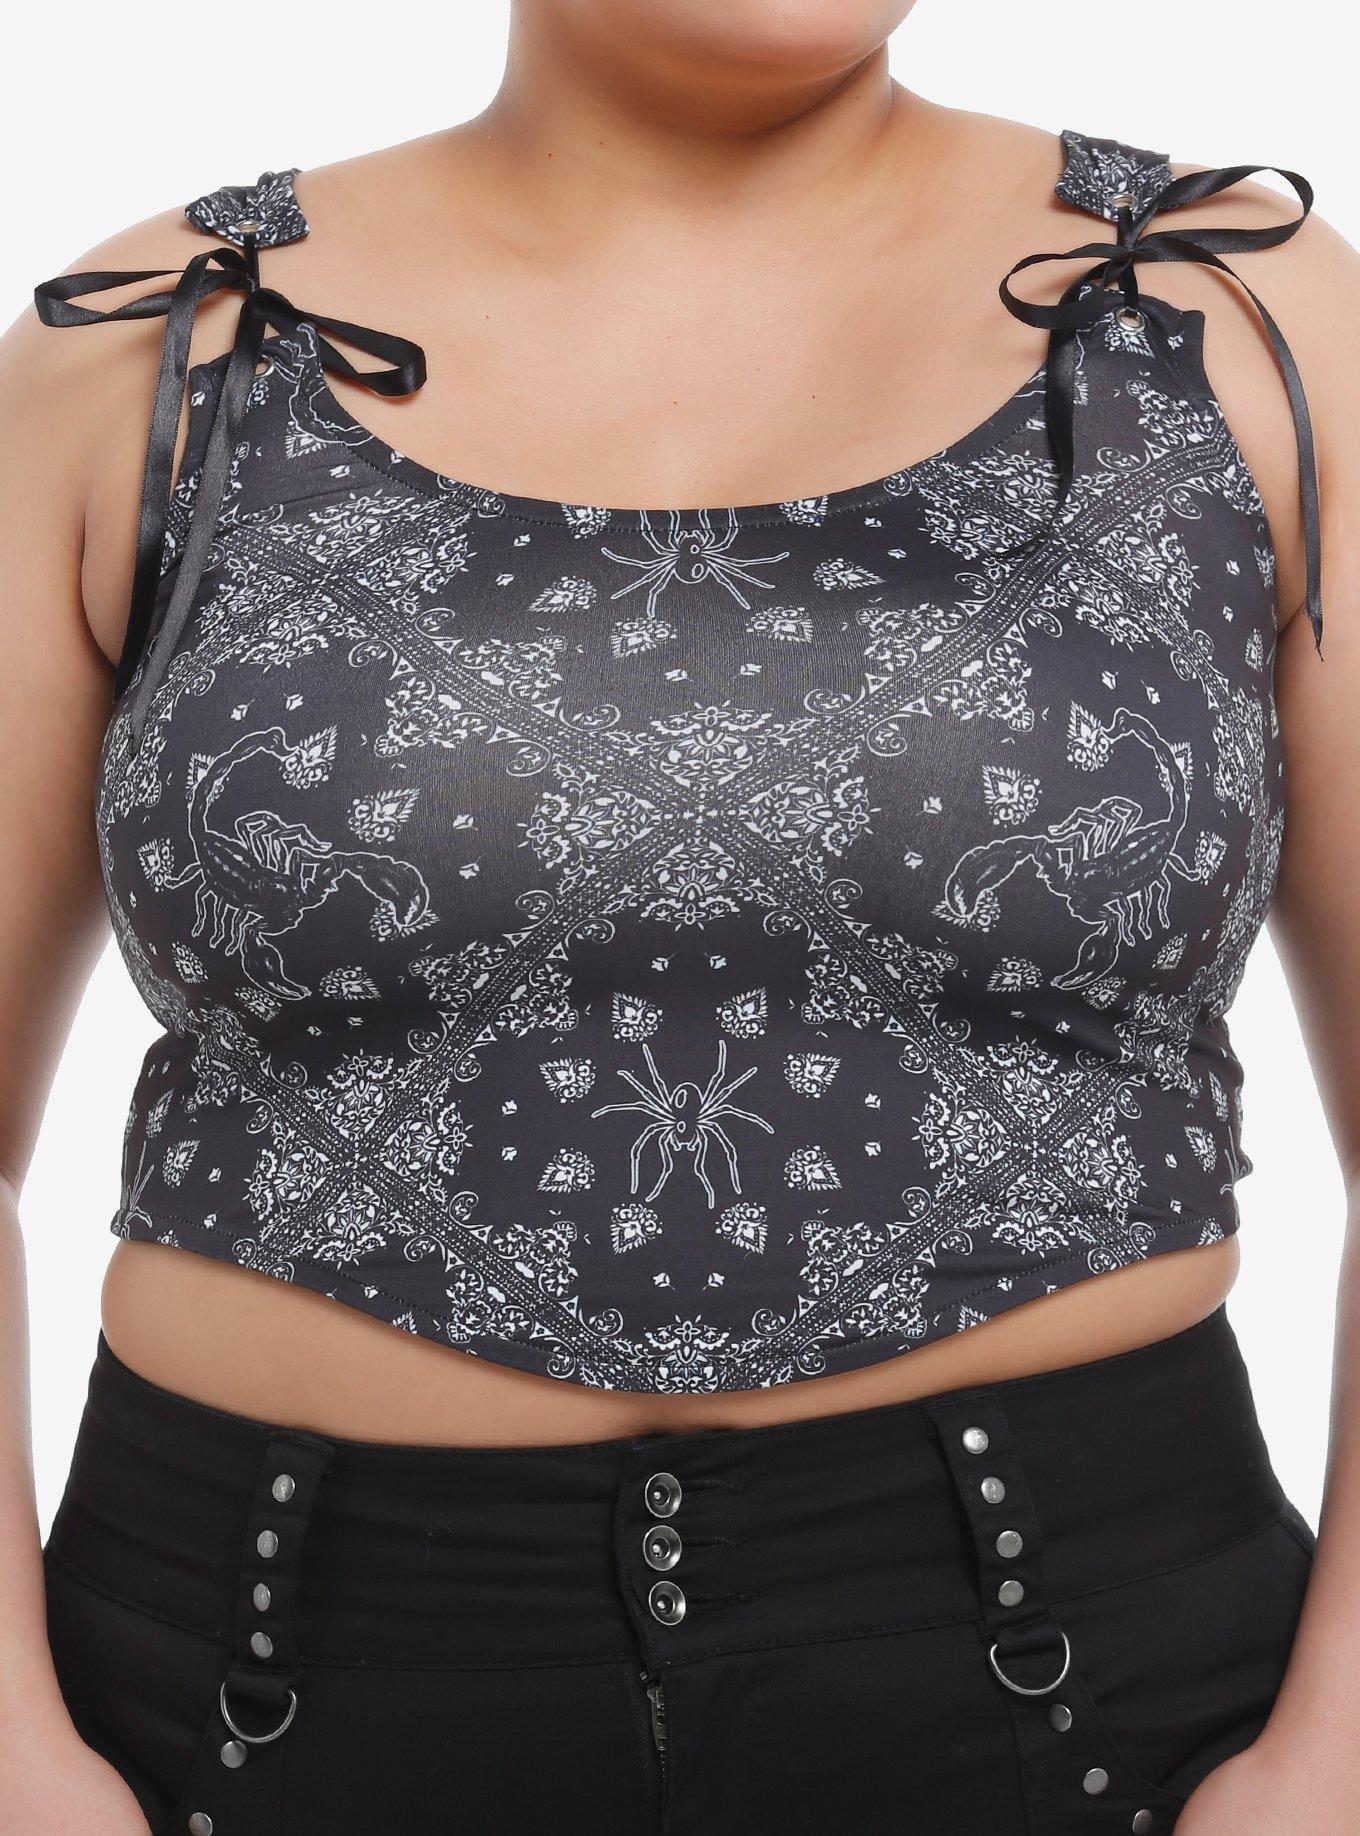 Is That The New Academia Floral Lace Halter Bralette ??